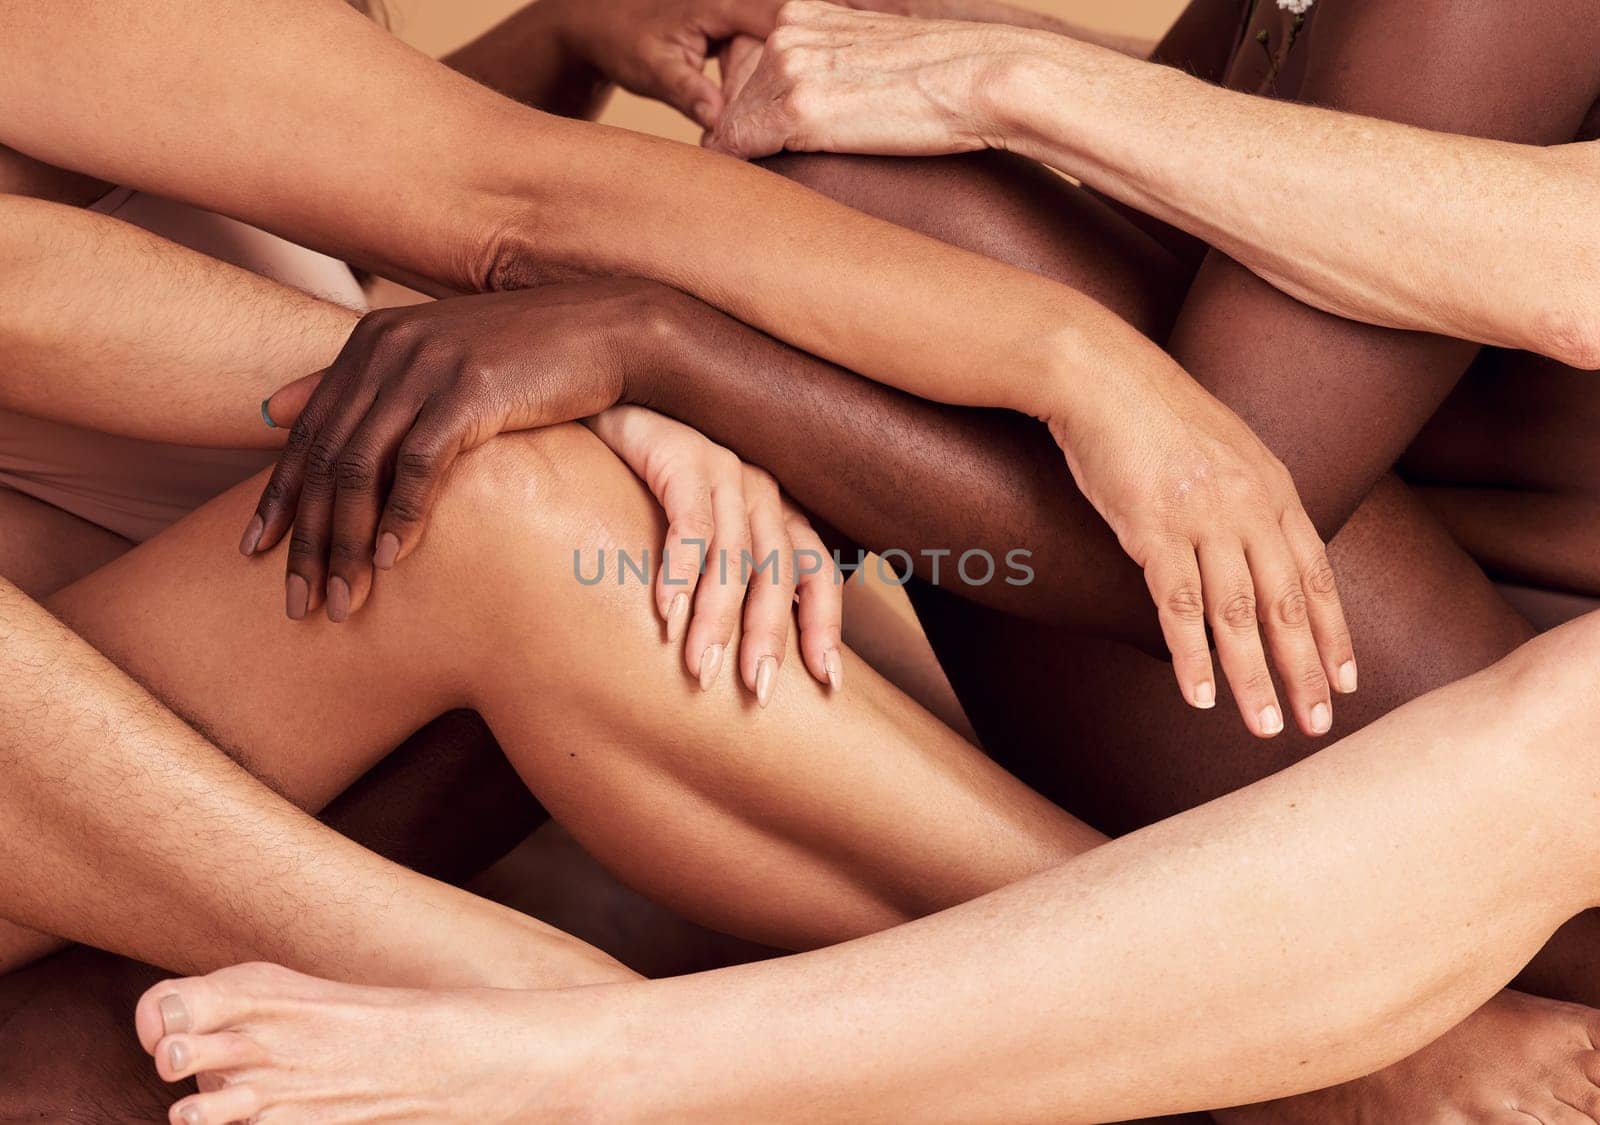 Beauty legs, hands and diversity women together in solidarity, support and woman empowerment for body positivity. Epilation, skincare and model girl friends with self love, wellness and self care.